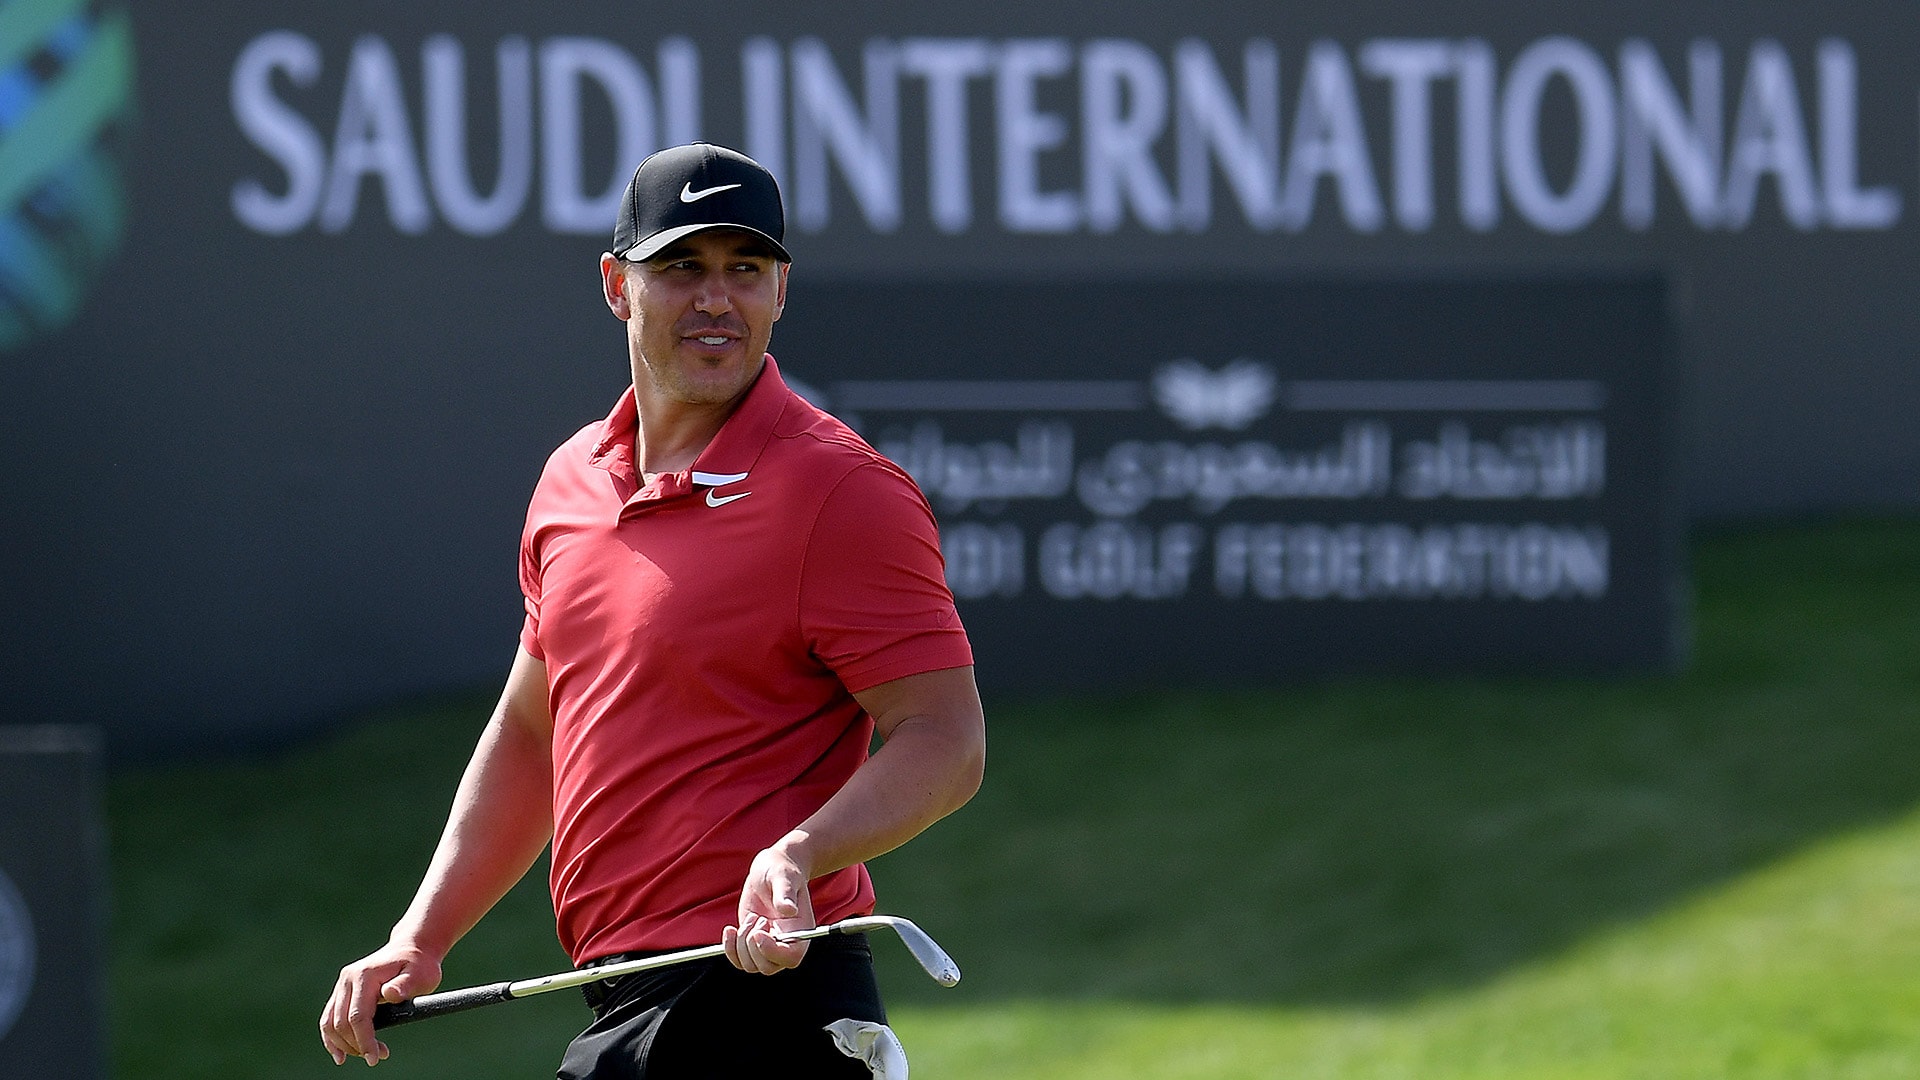 Dustin Johnson, Brooks Koepka and past critic Paul Casey sign up for Saudi event